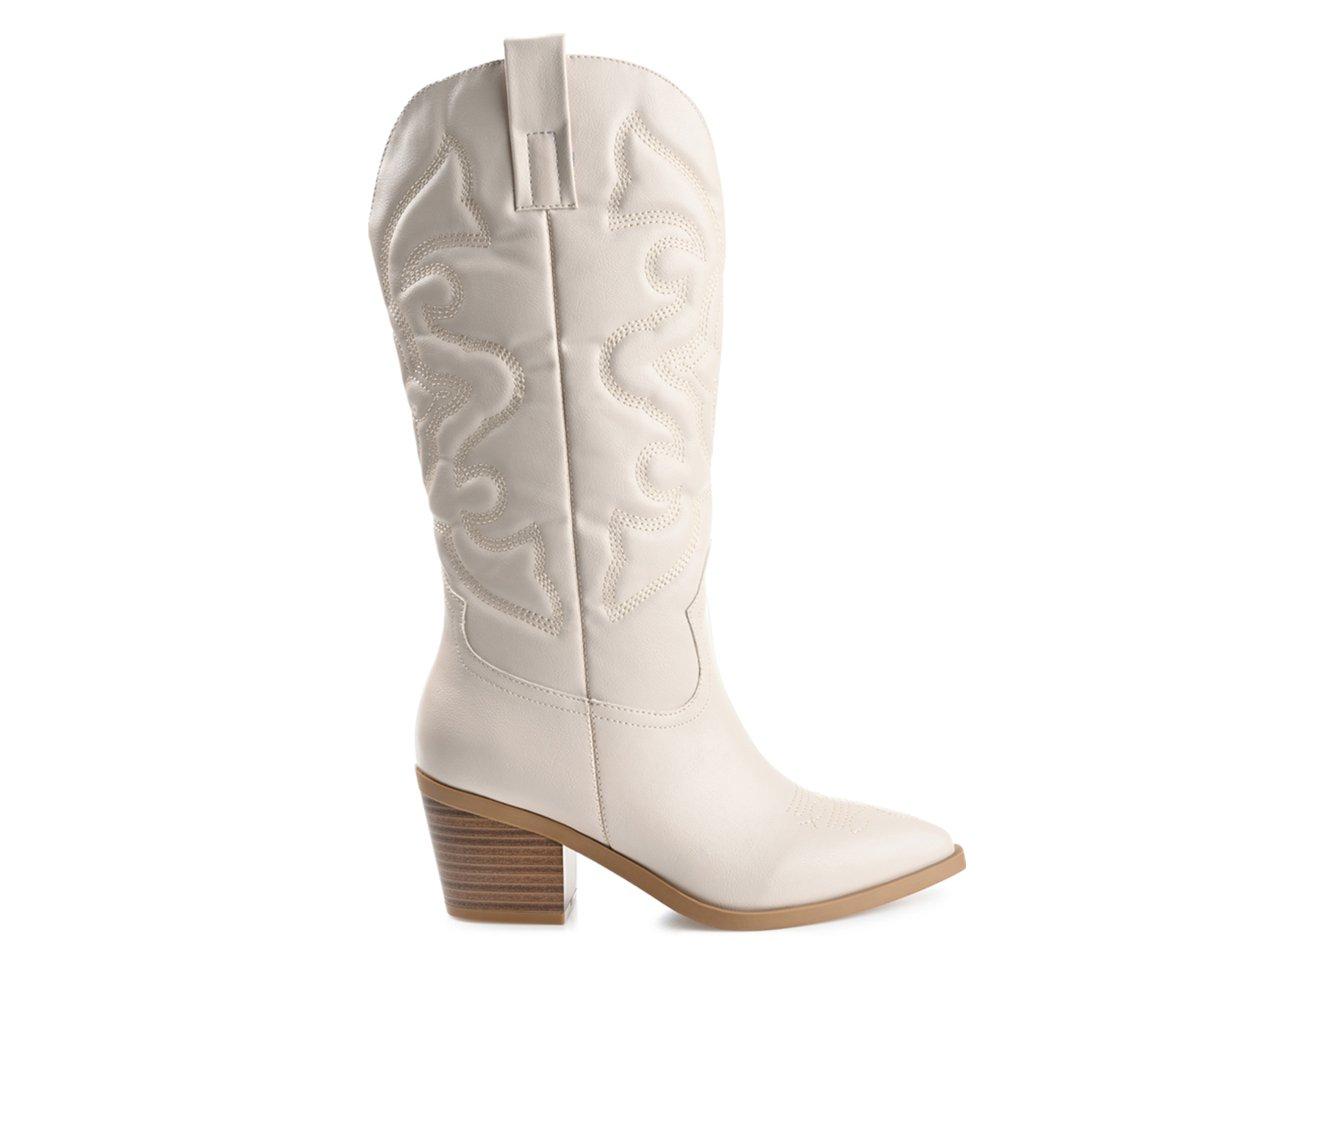 Women's Journee Collection Chantry Mid Calf Western Boots